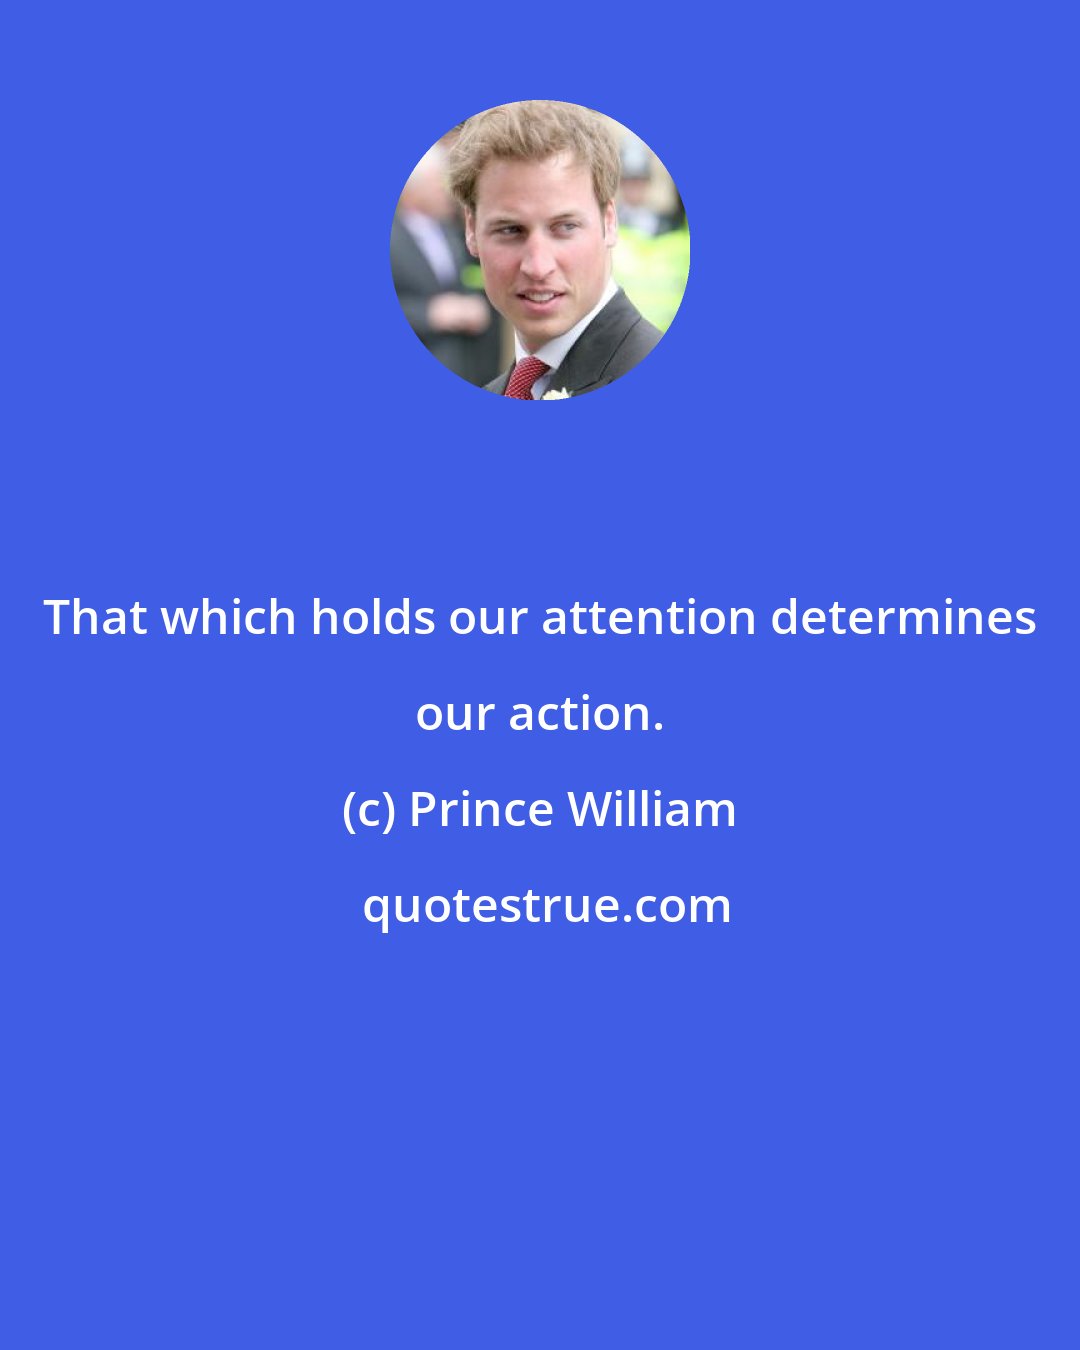 Prince William: That which holds our attention determines our action.